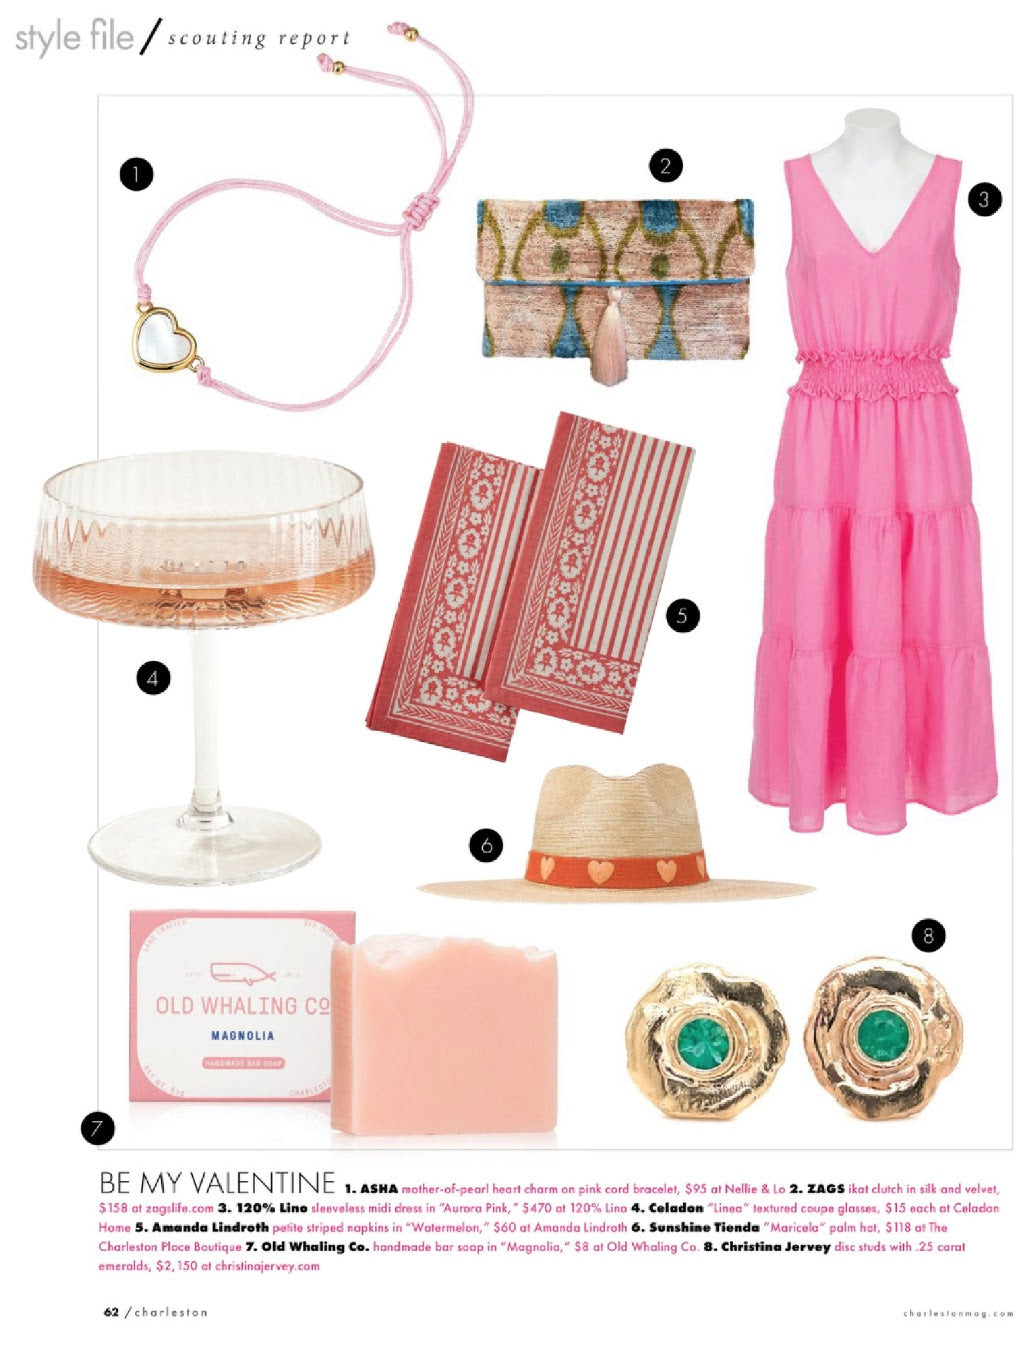 Charleston Magazine February 2023 Valentine's Day Gift Guide featuring Old Whaling Co Magnolia Bar Soap